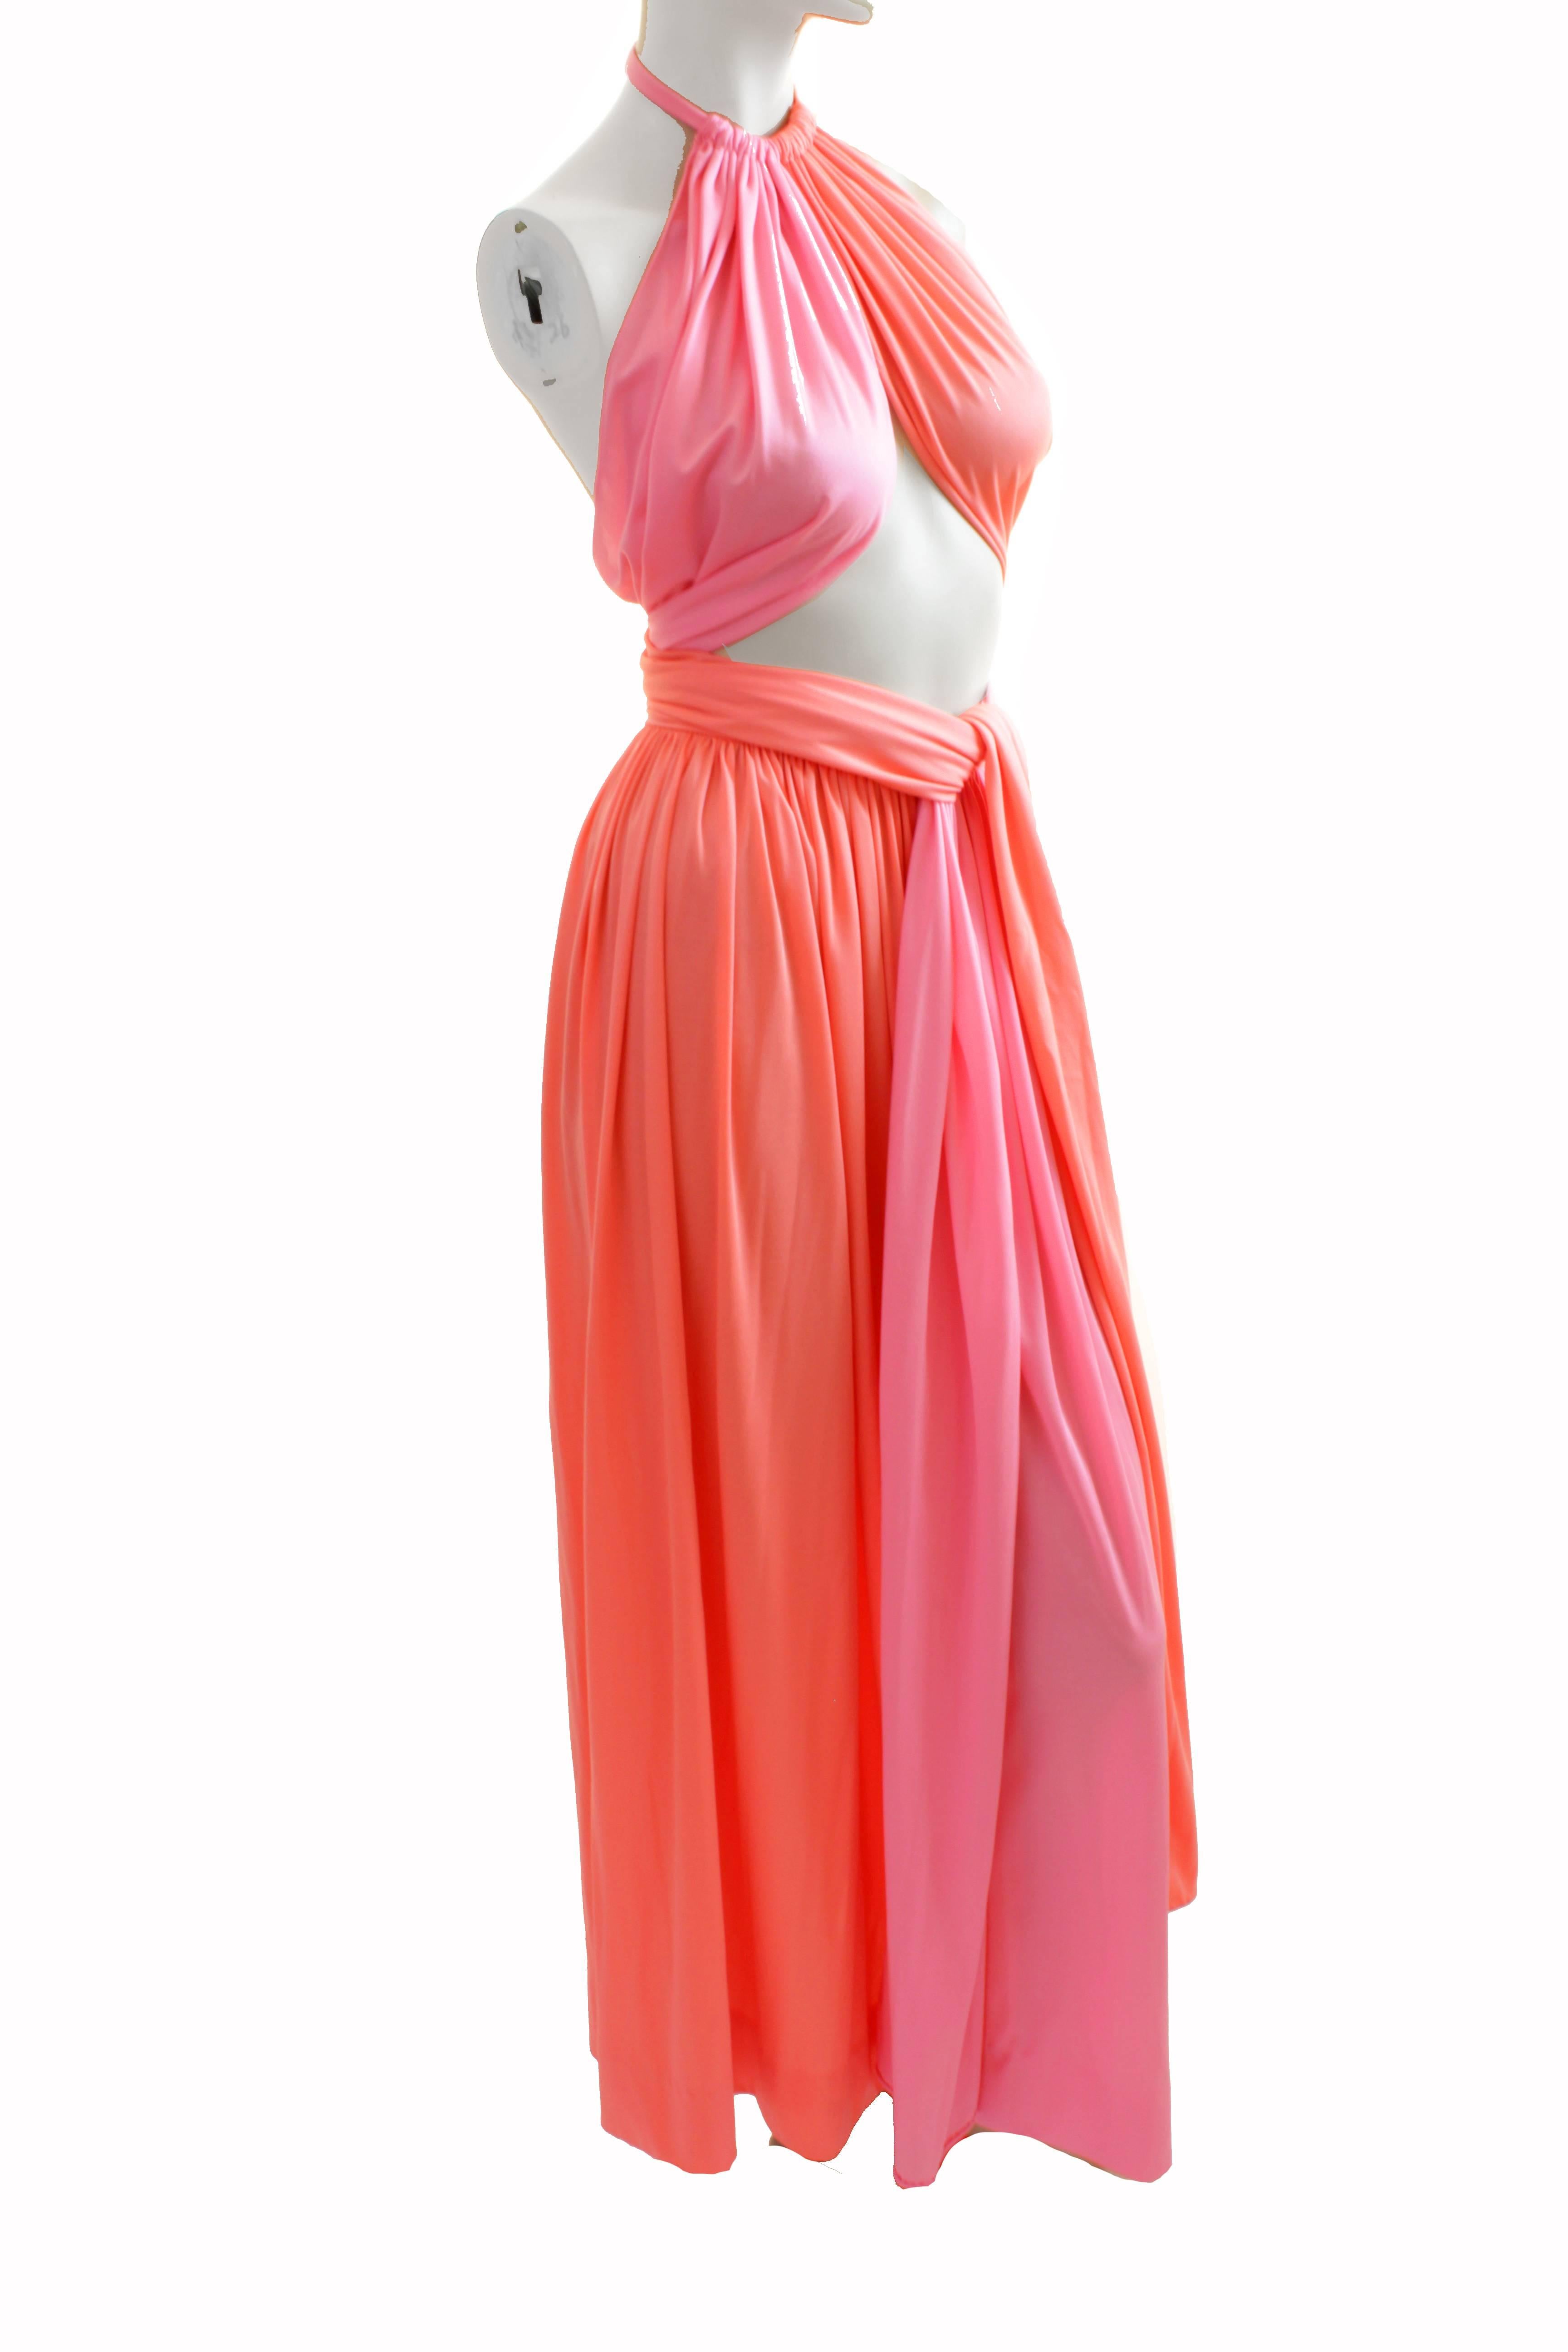 This fabulous two piece halter top and skirt ensemble was made by Donald Brooks Boutique, most likely in the early 1970s.  Made from a color block sherbert pink and melon silky jersey fabric, it features a cool tie-wrap halter top that can be